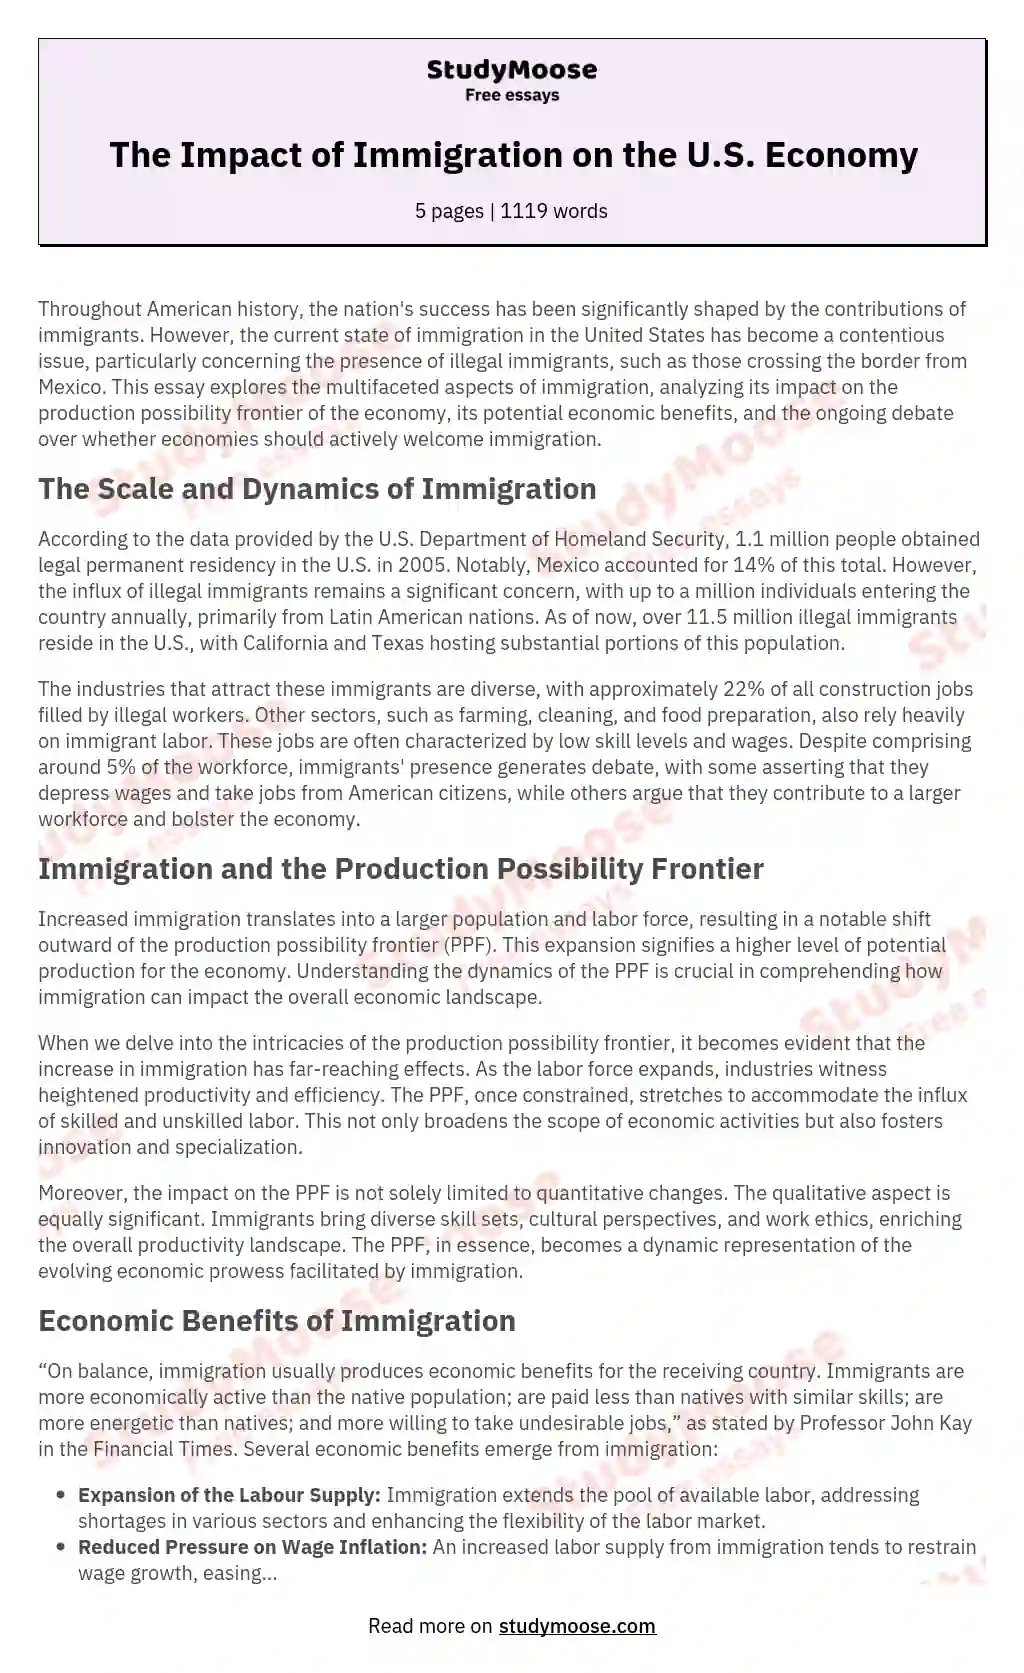 The Impact of Immigration on the U.S. Economy essay